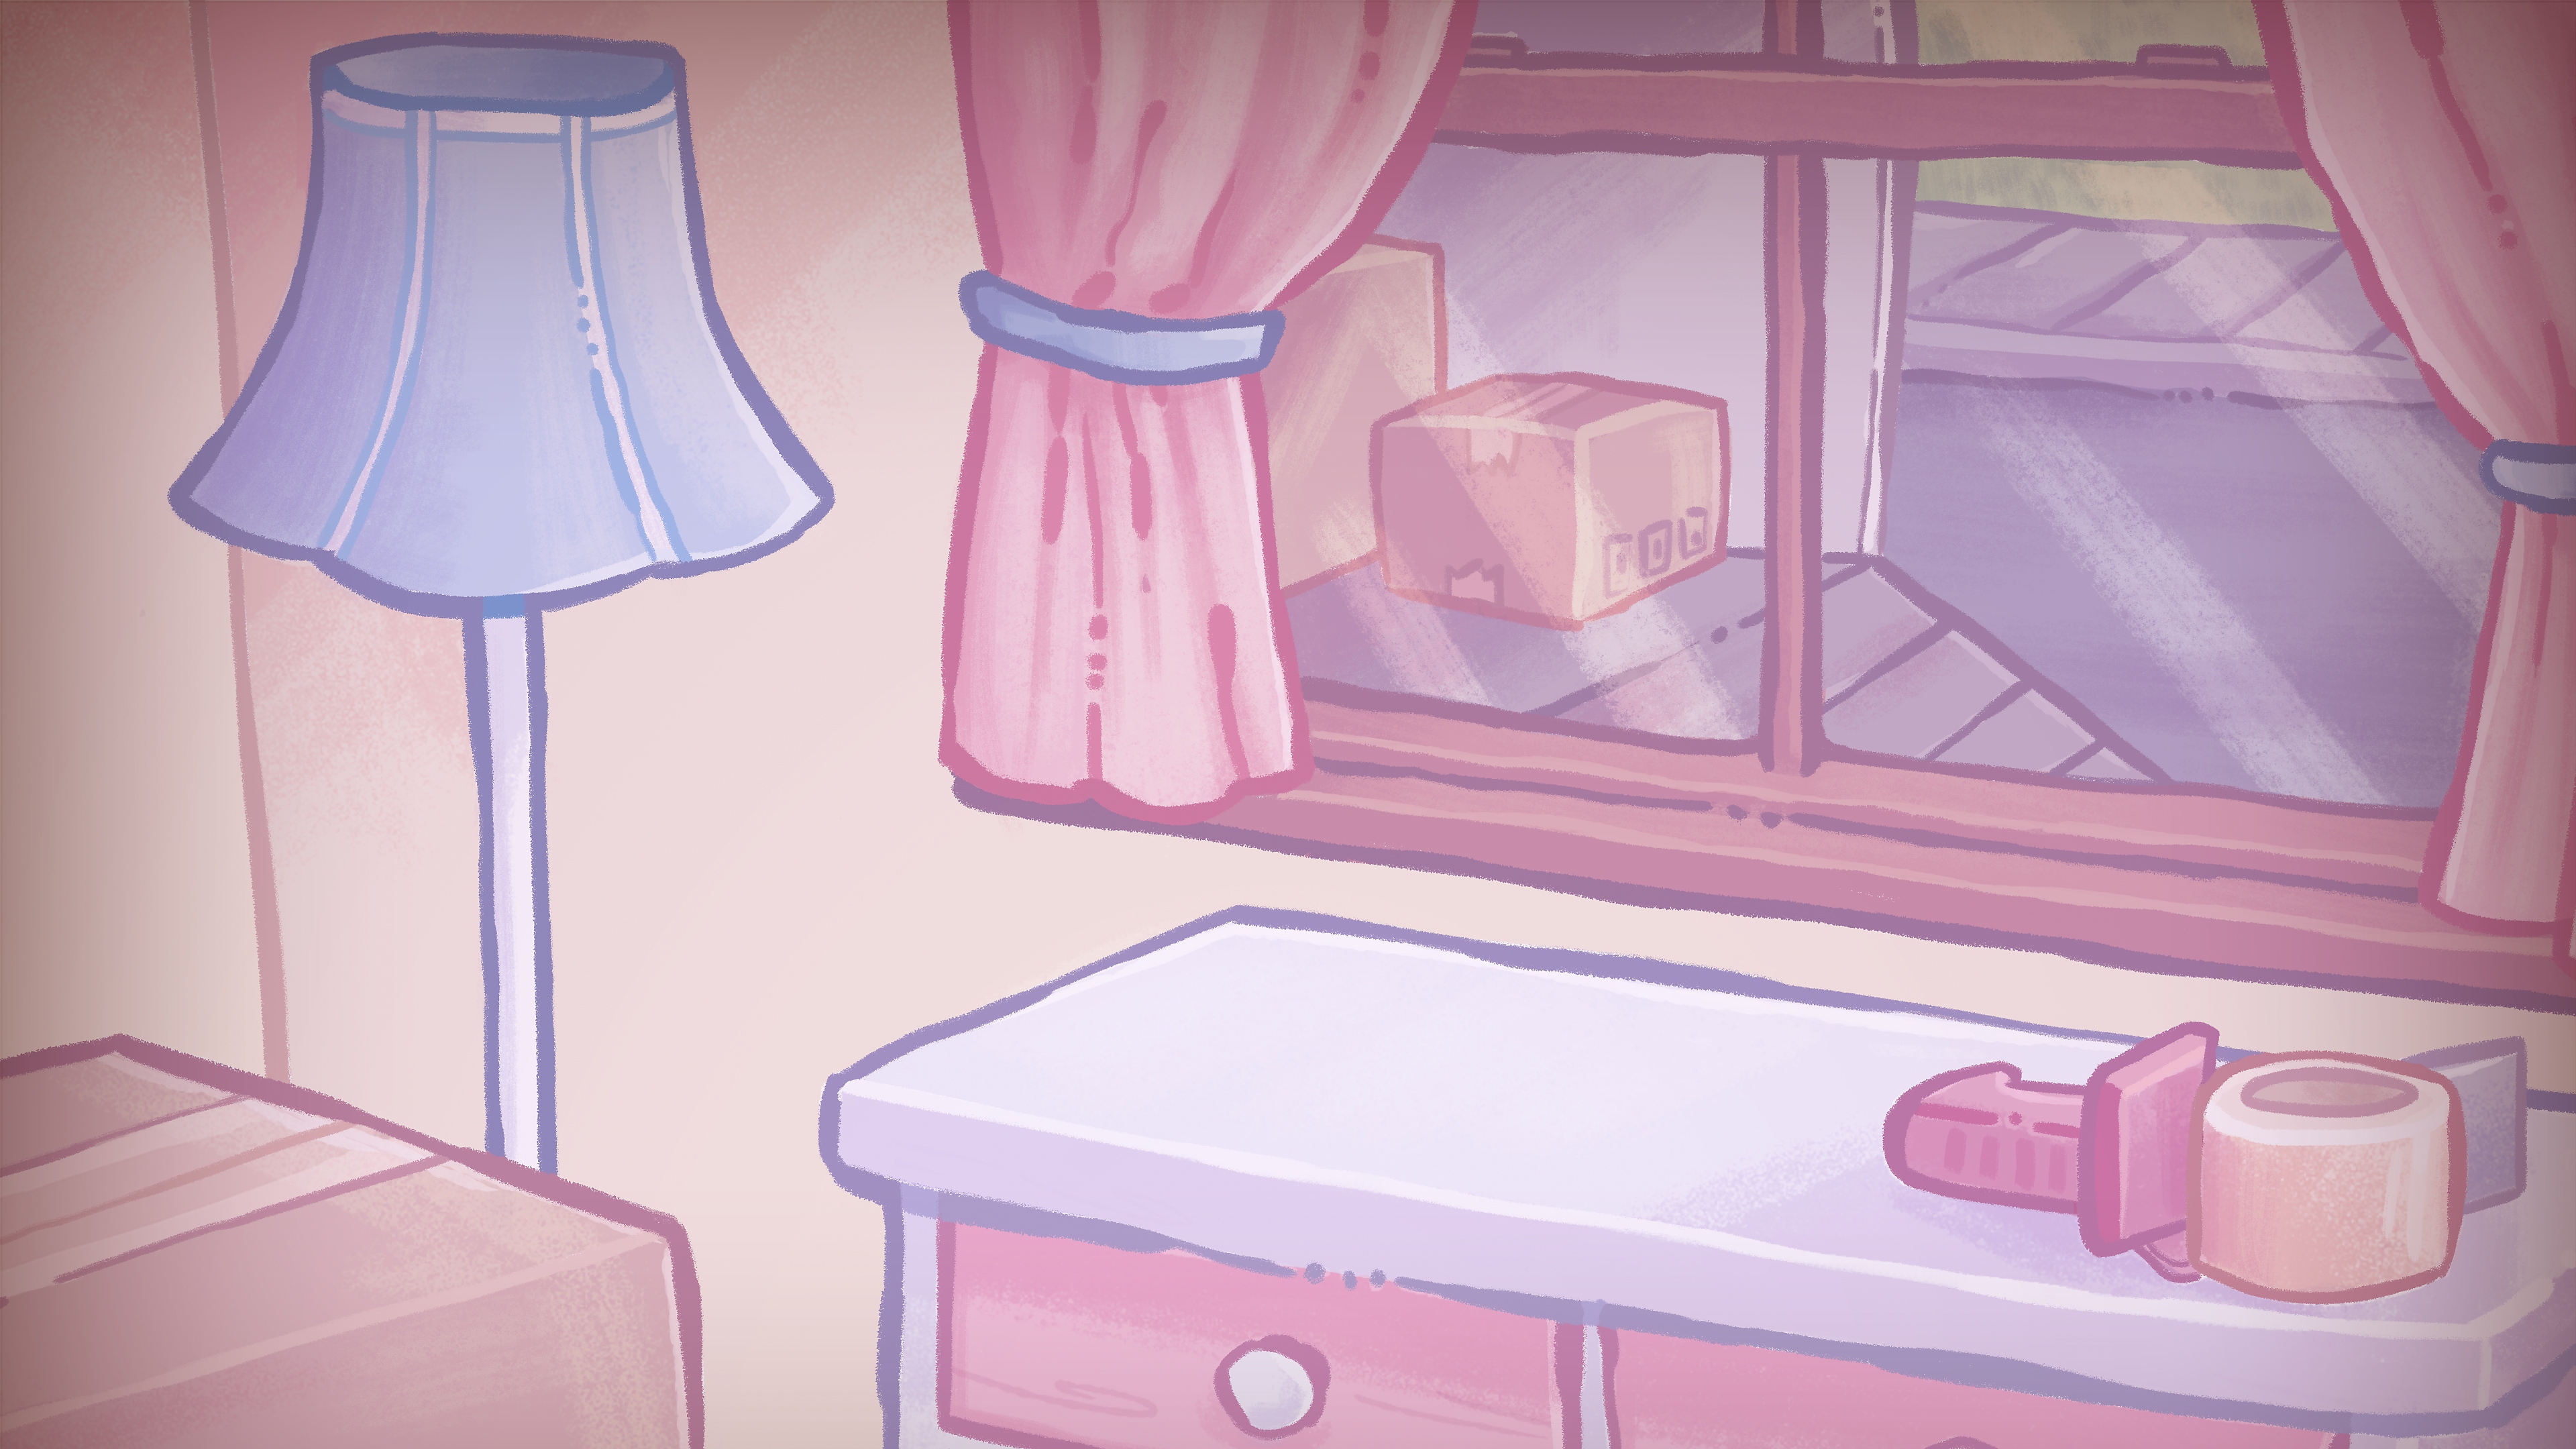 Unpacking background artwork featuring a chest of drawers in front of a window